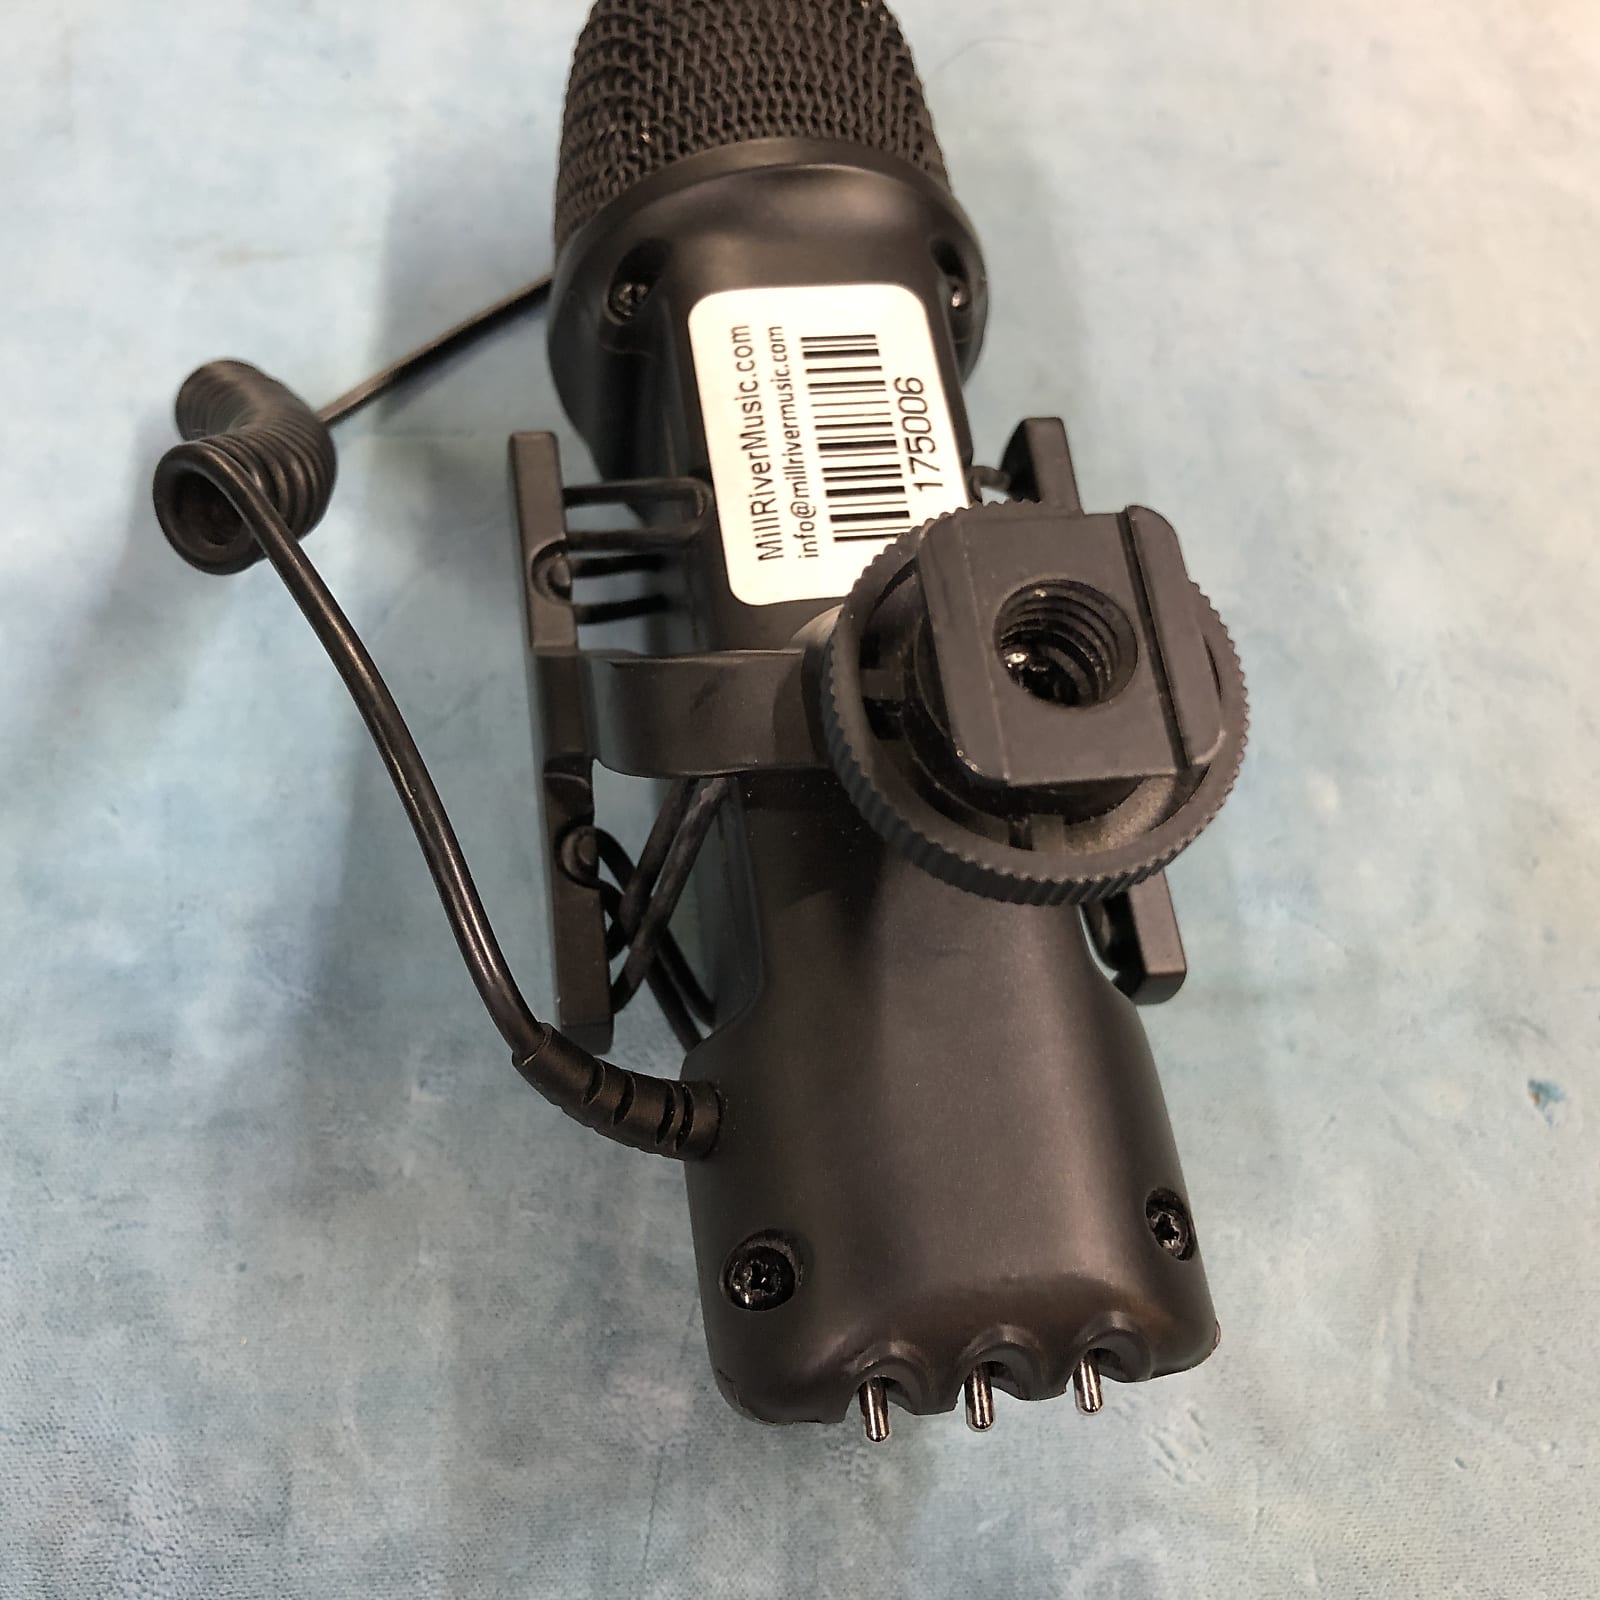 Rode SVM Stereo VideoMic On-Camera Microphone